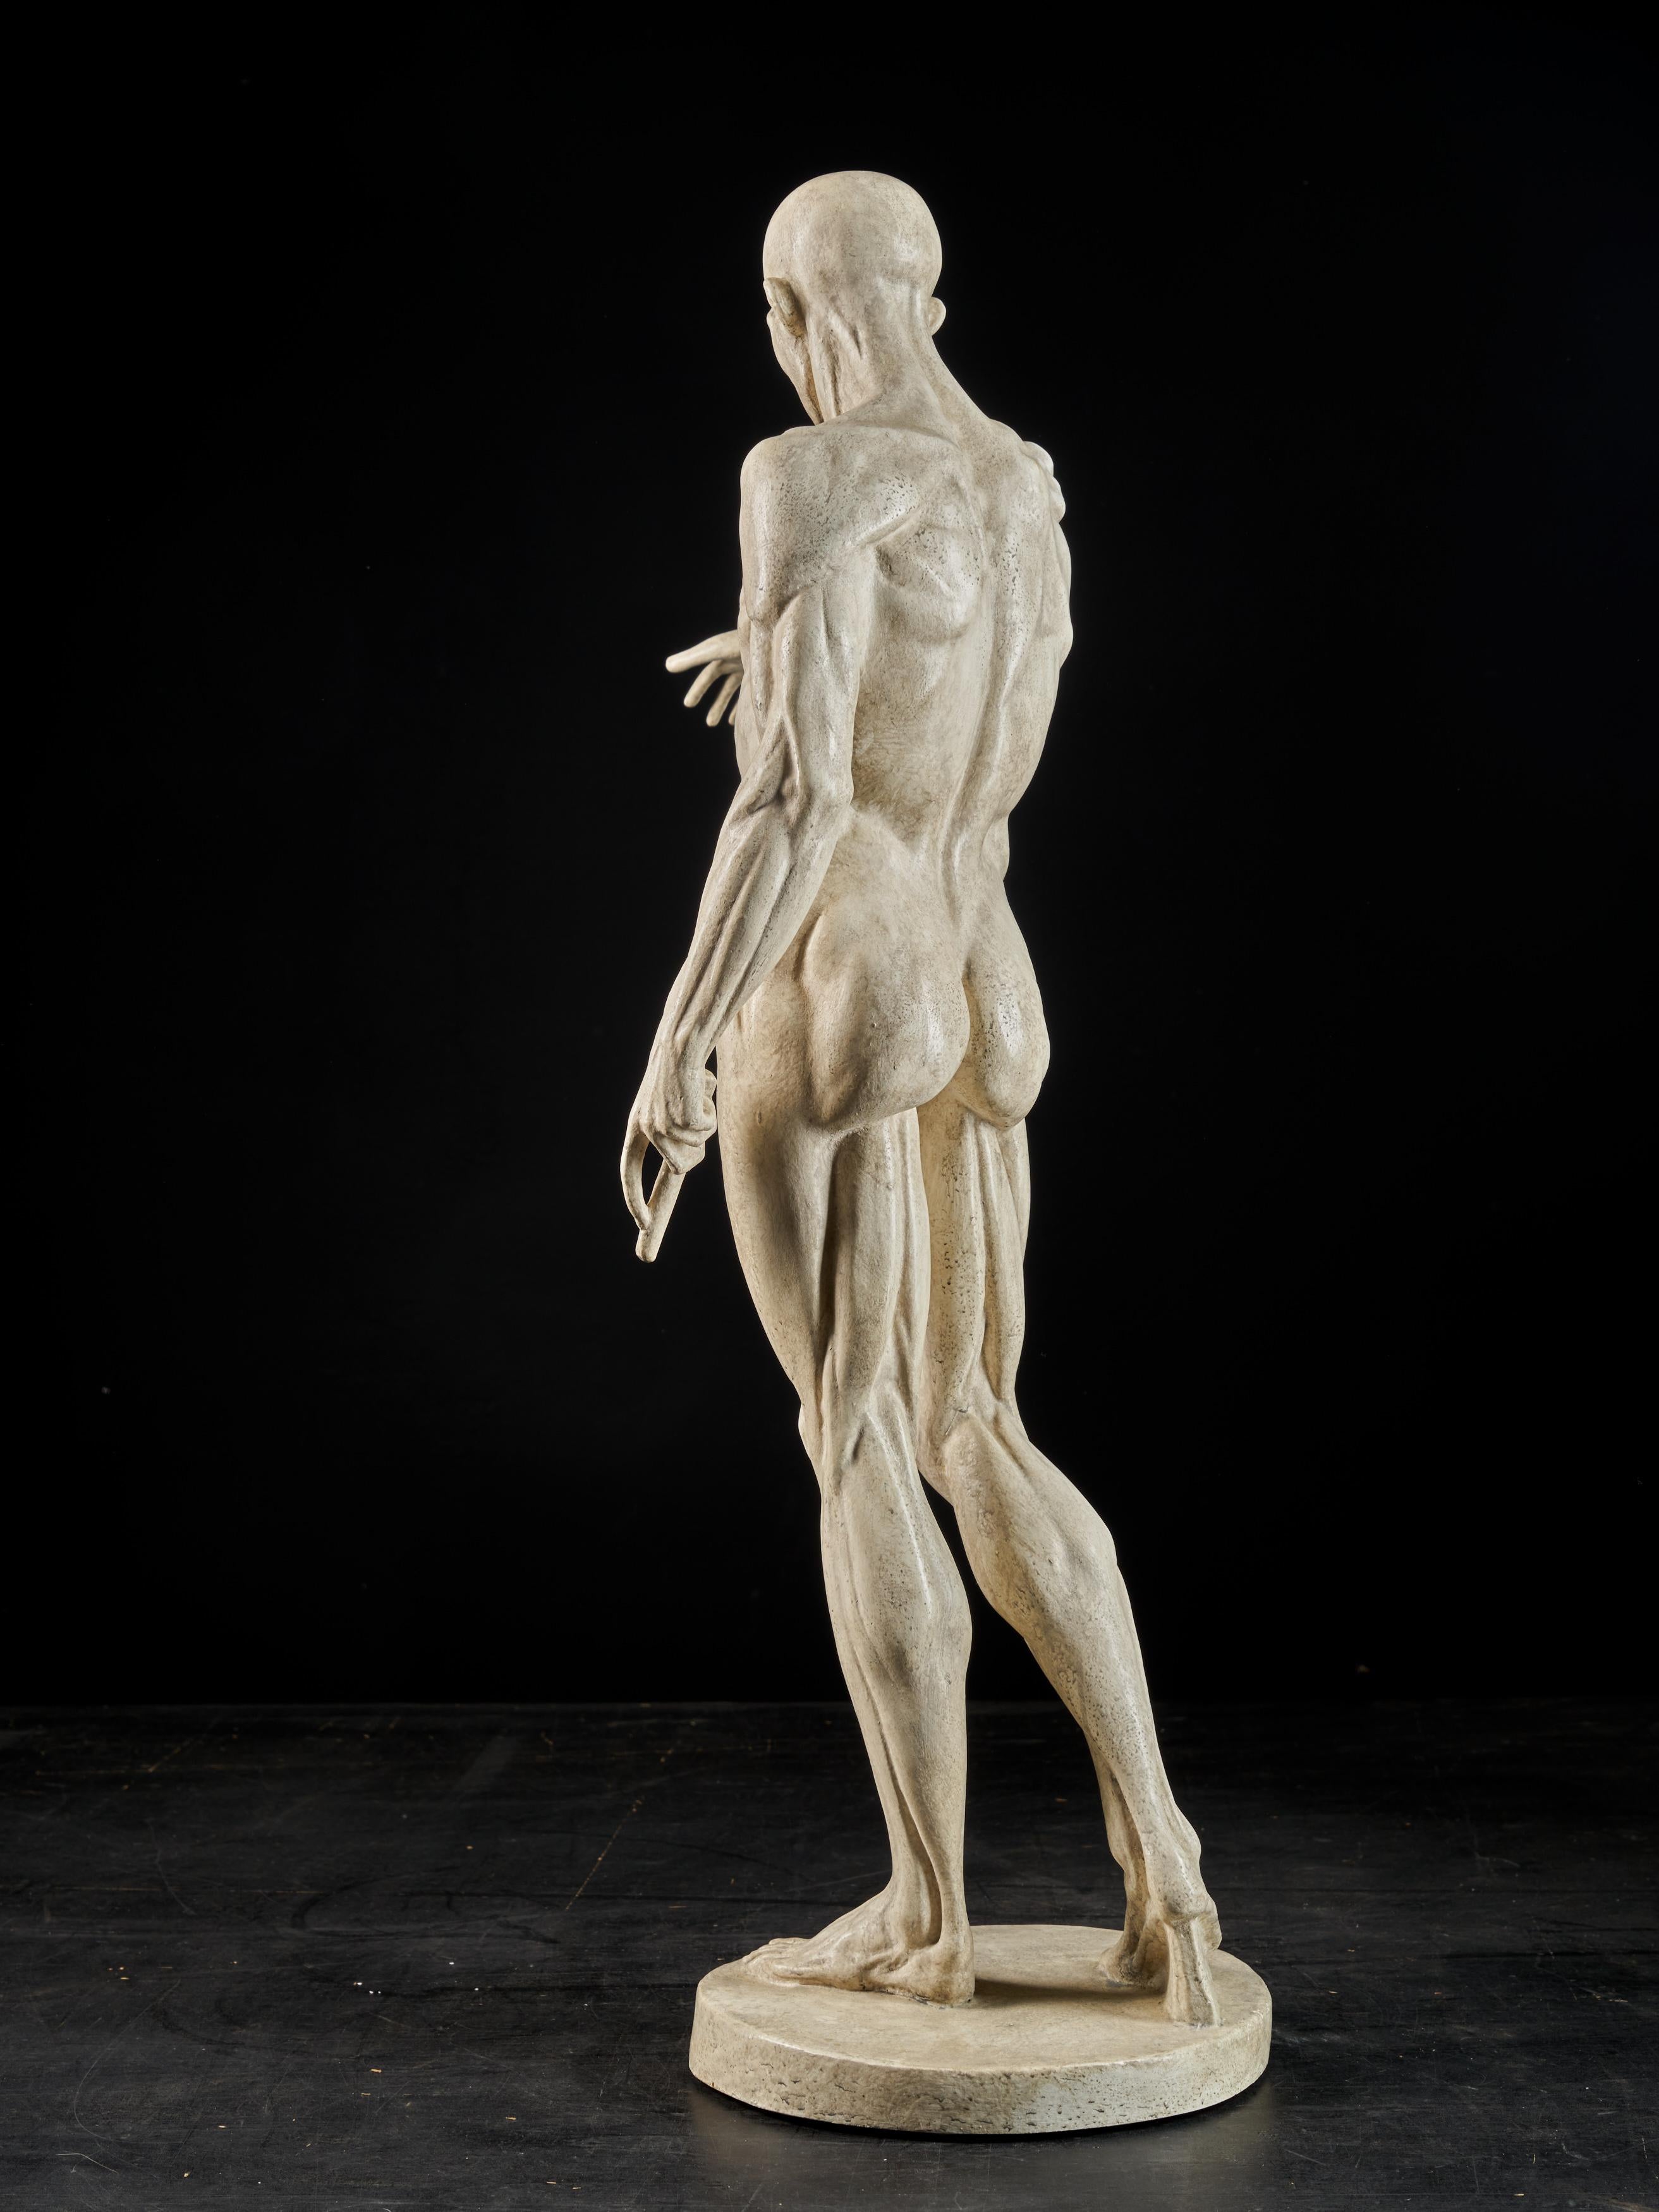 19th Century, Italian School, Two Anatomical Flayed Figures in Plaster 15